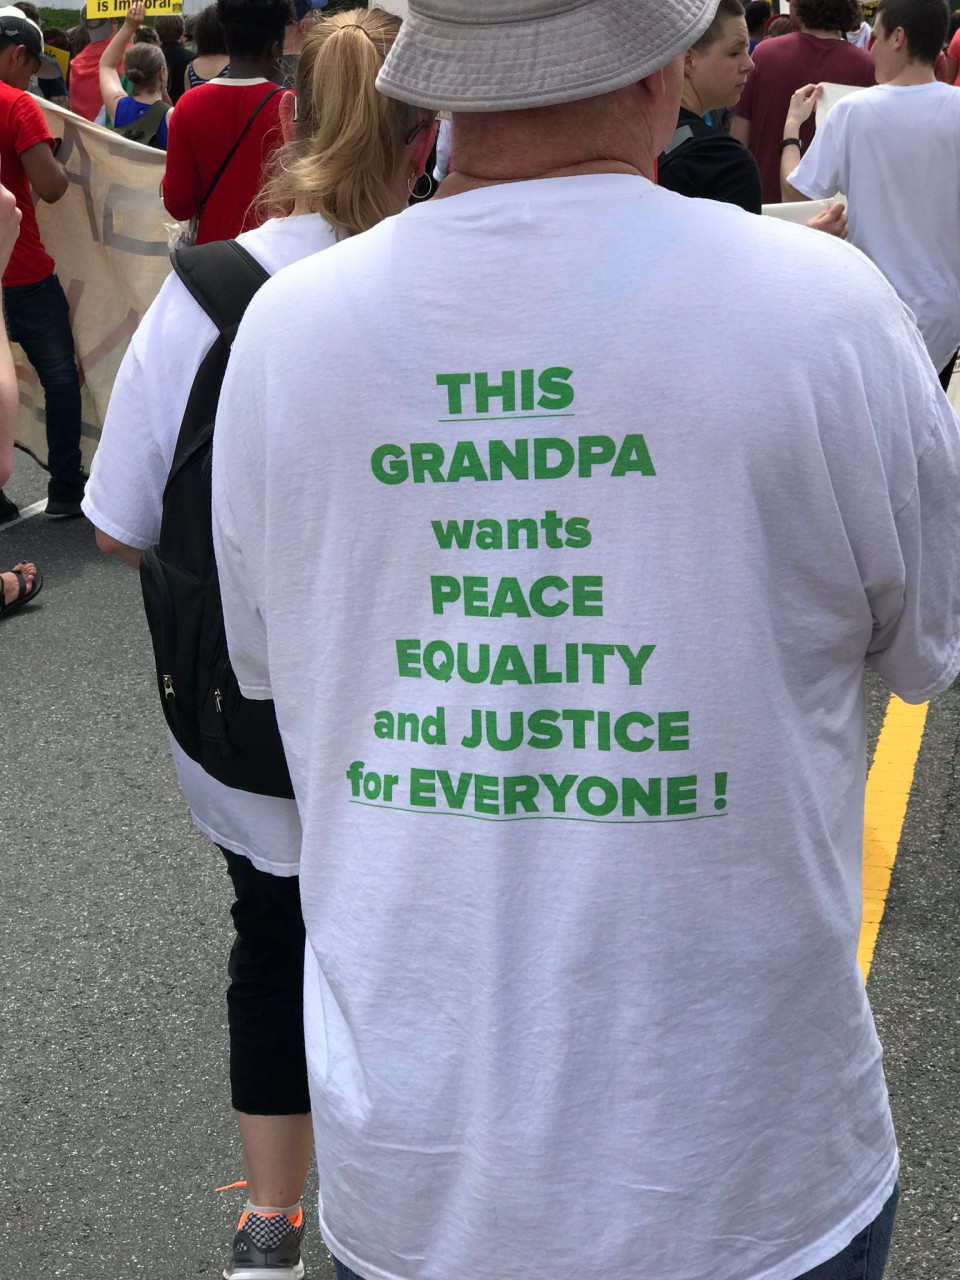 Poor People's Campaign - This grandpa wants <a class="bx-tag" rel="tag" href="https://wethepeople.care/page/view-channel-profile?id=13"><s>#</s><b>peace</b></a>, <a class="bx-tag" rel="tag" href="https://wethepeople.care/page/view-channel-profile?id=1519"><s>#</s><b>equality</b></a>, and <a class="bx-tag" rel="tag" href="https://wethepeople.care/page/view-channel-profile?id=93"><s>#</s><b>justice</b></a> for everyone